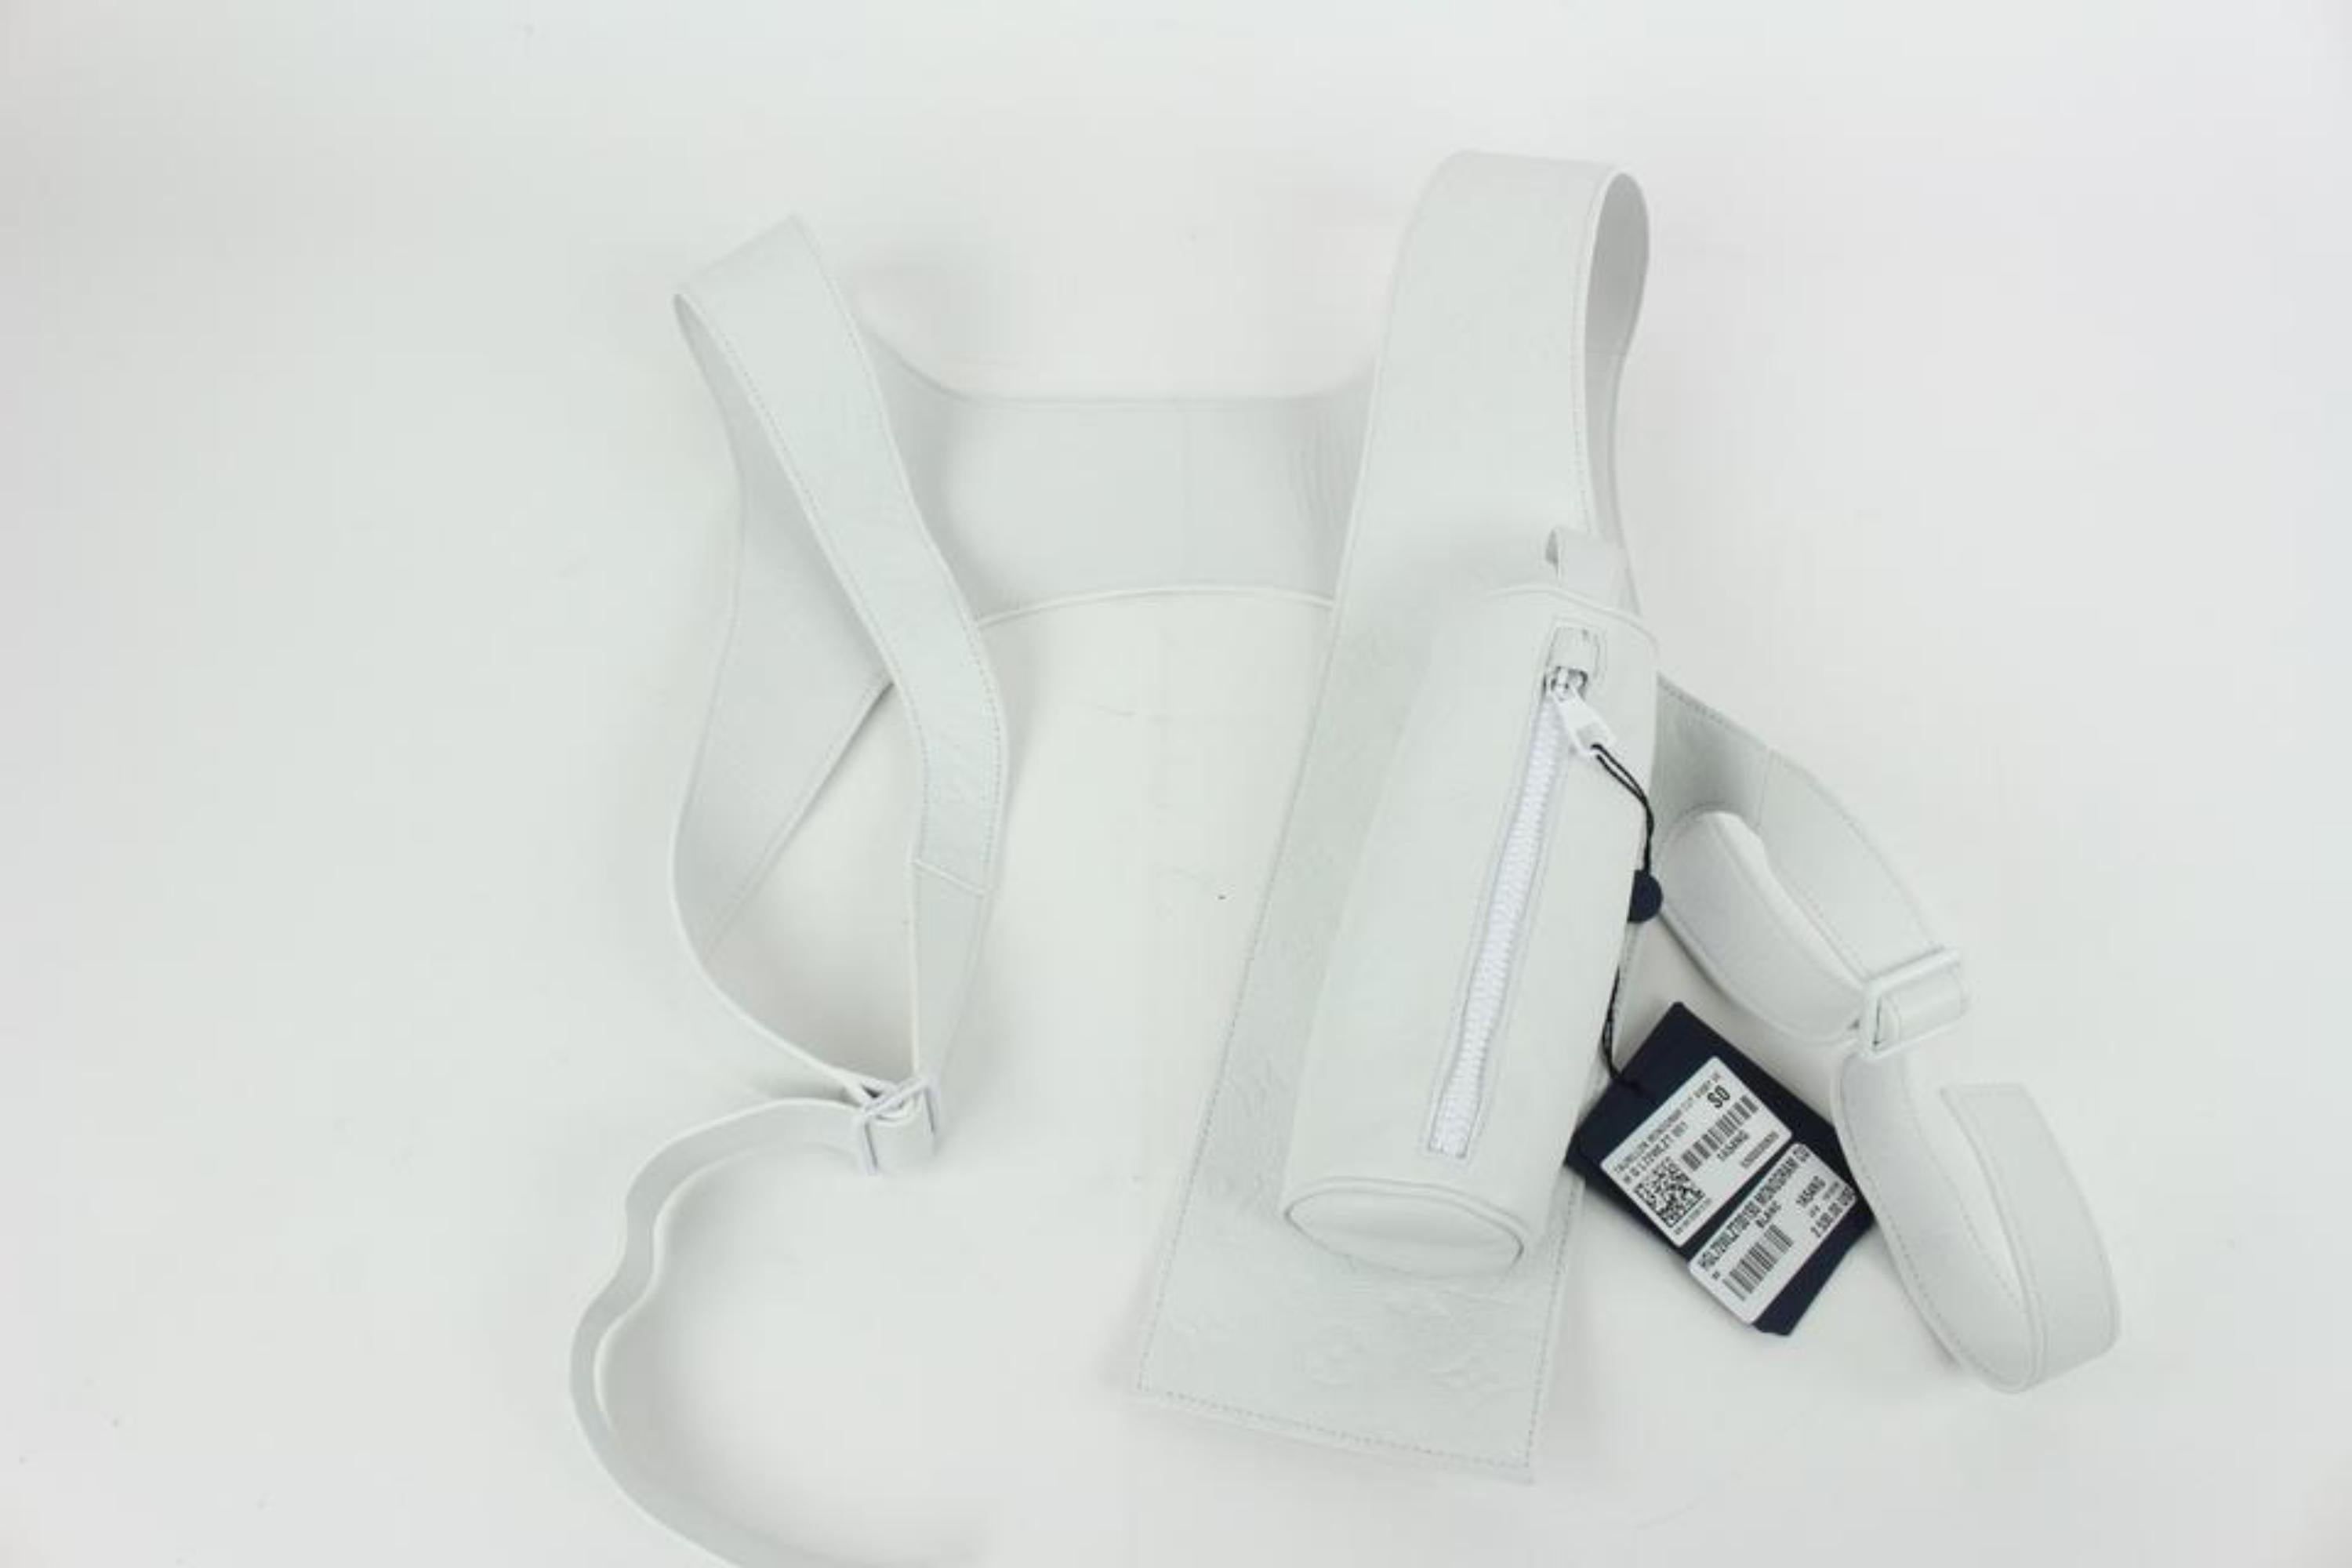 Louis Vuitton Virgil Abloh Empreinte Cut Away Vest 15lz1023 White Backpack In New Condition For Sale In Forest Hills, NY